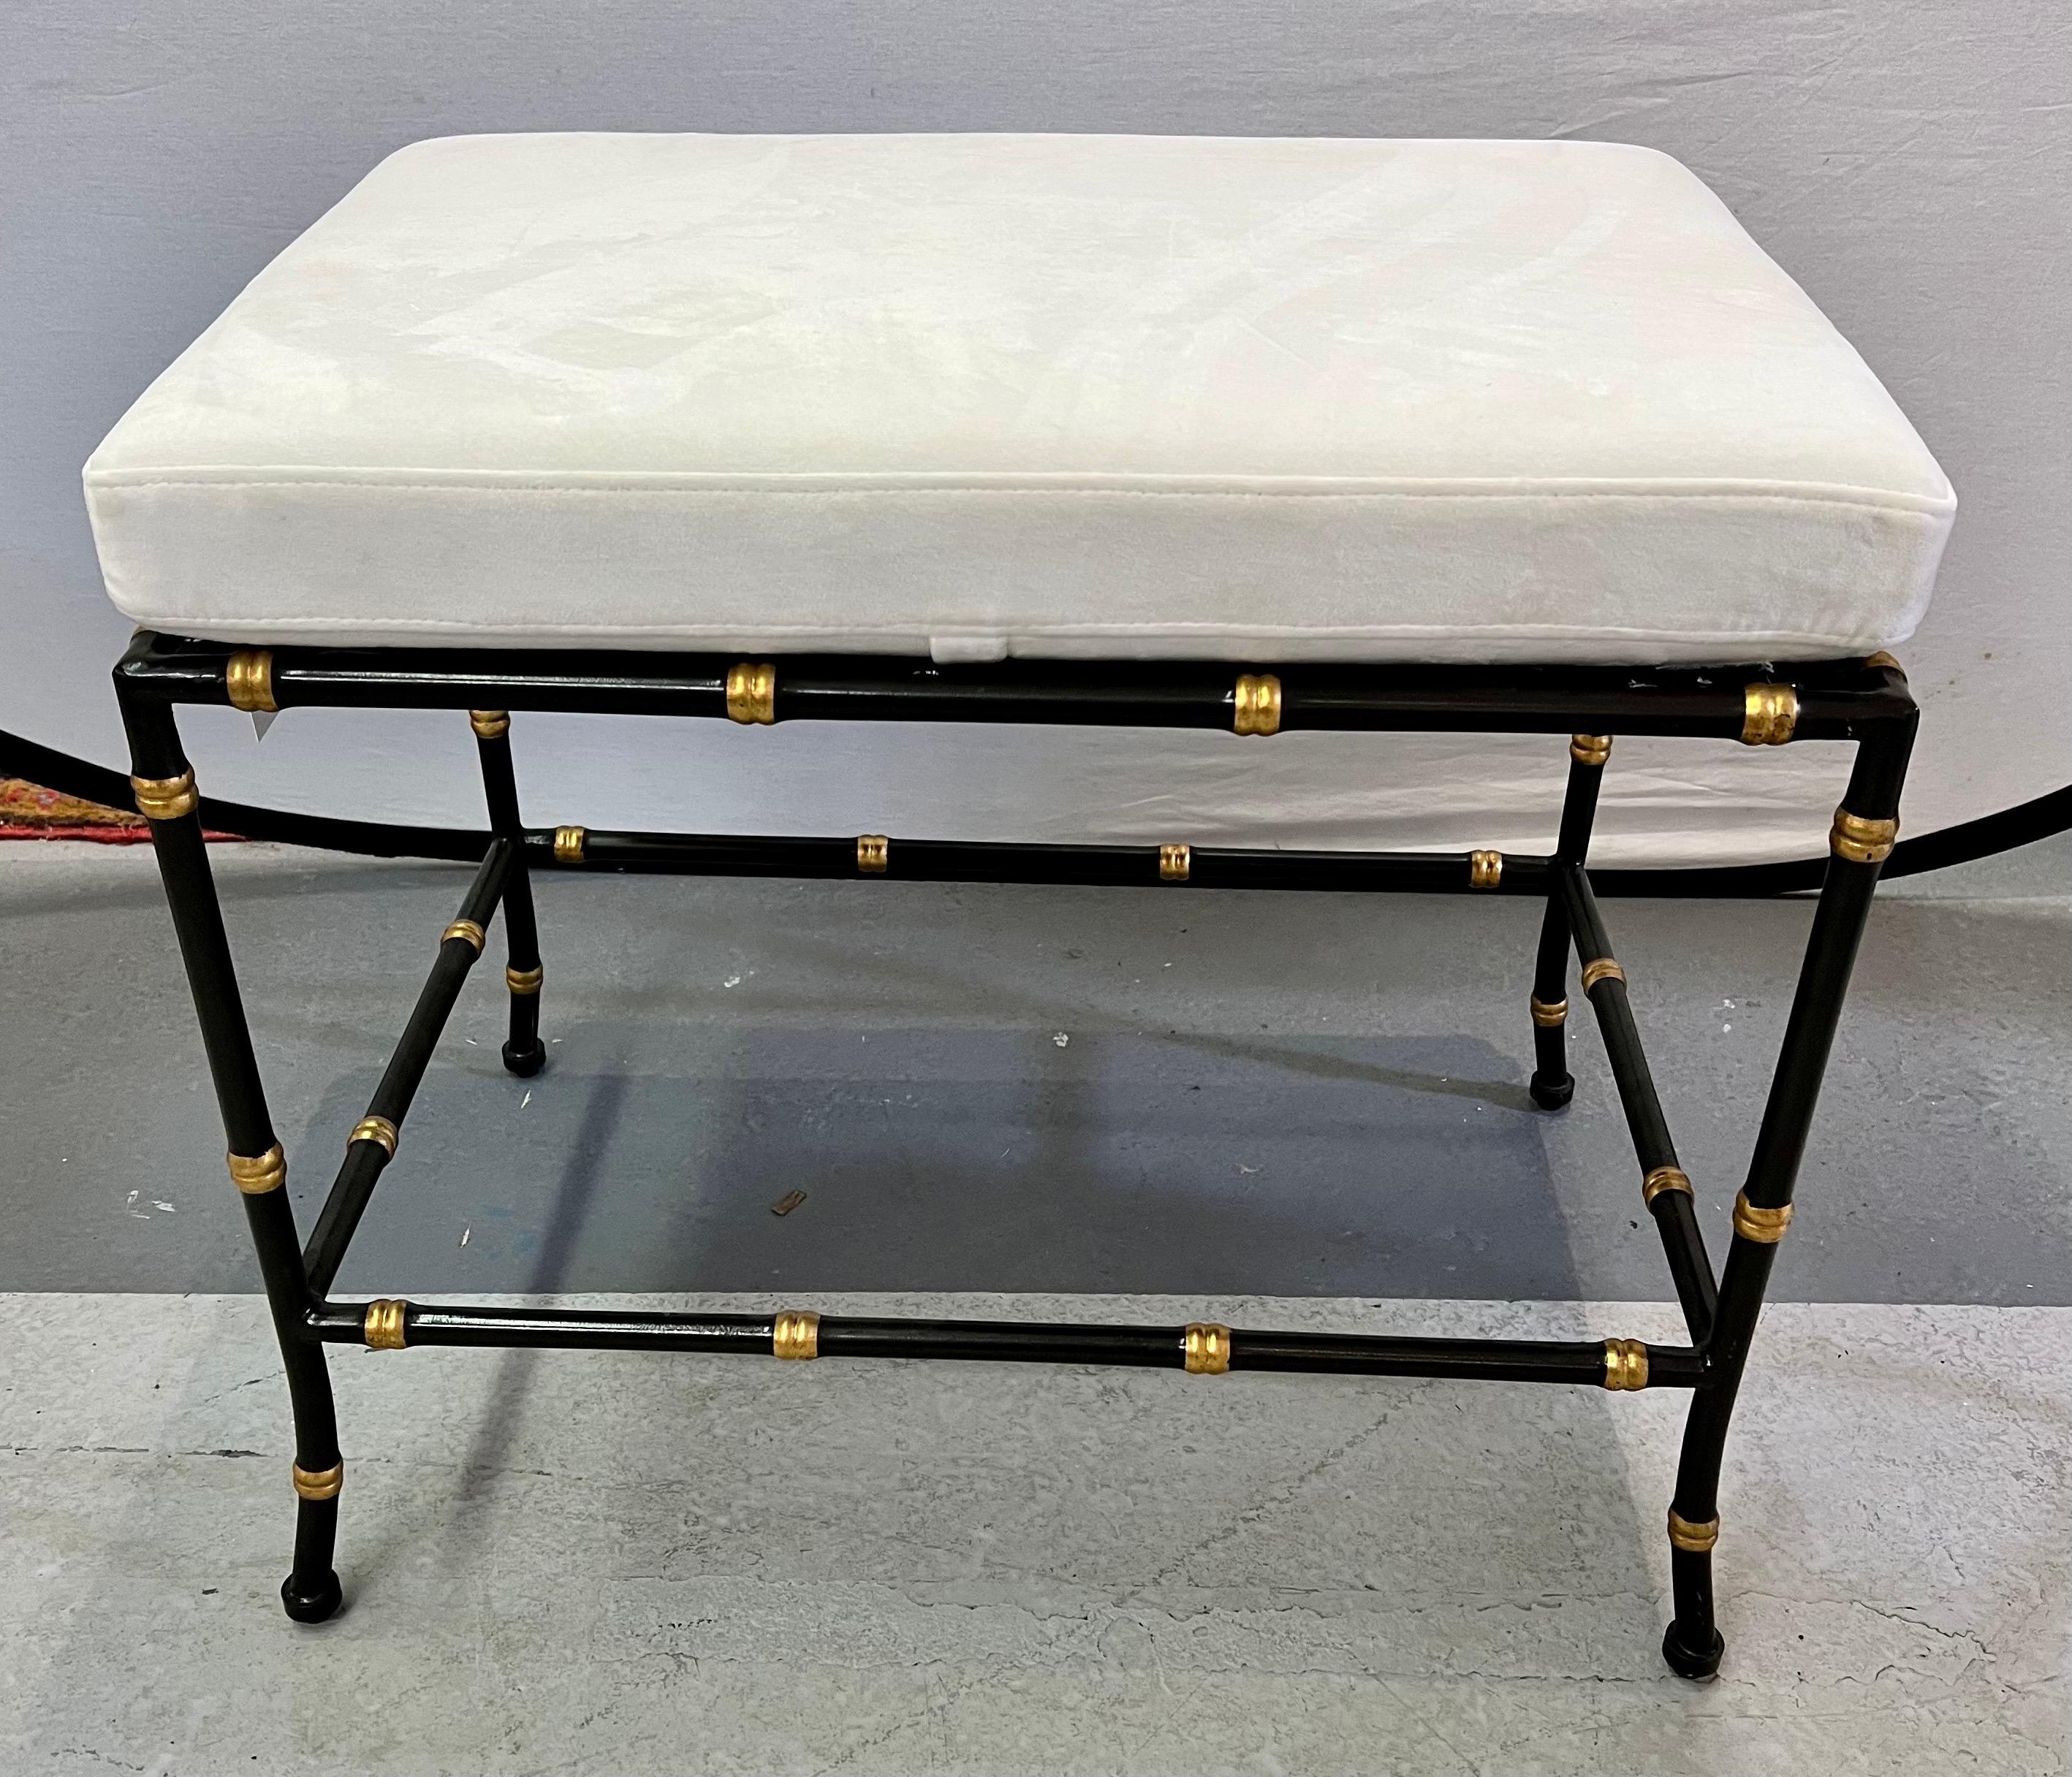 Elegant and tres chic pair of matching faux bamboo multi-purpose stools.
Handpainted in black and gold. Great with almost any aesthetic.
Why not own the best?.